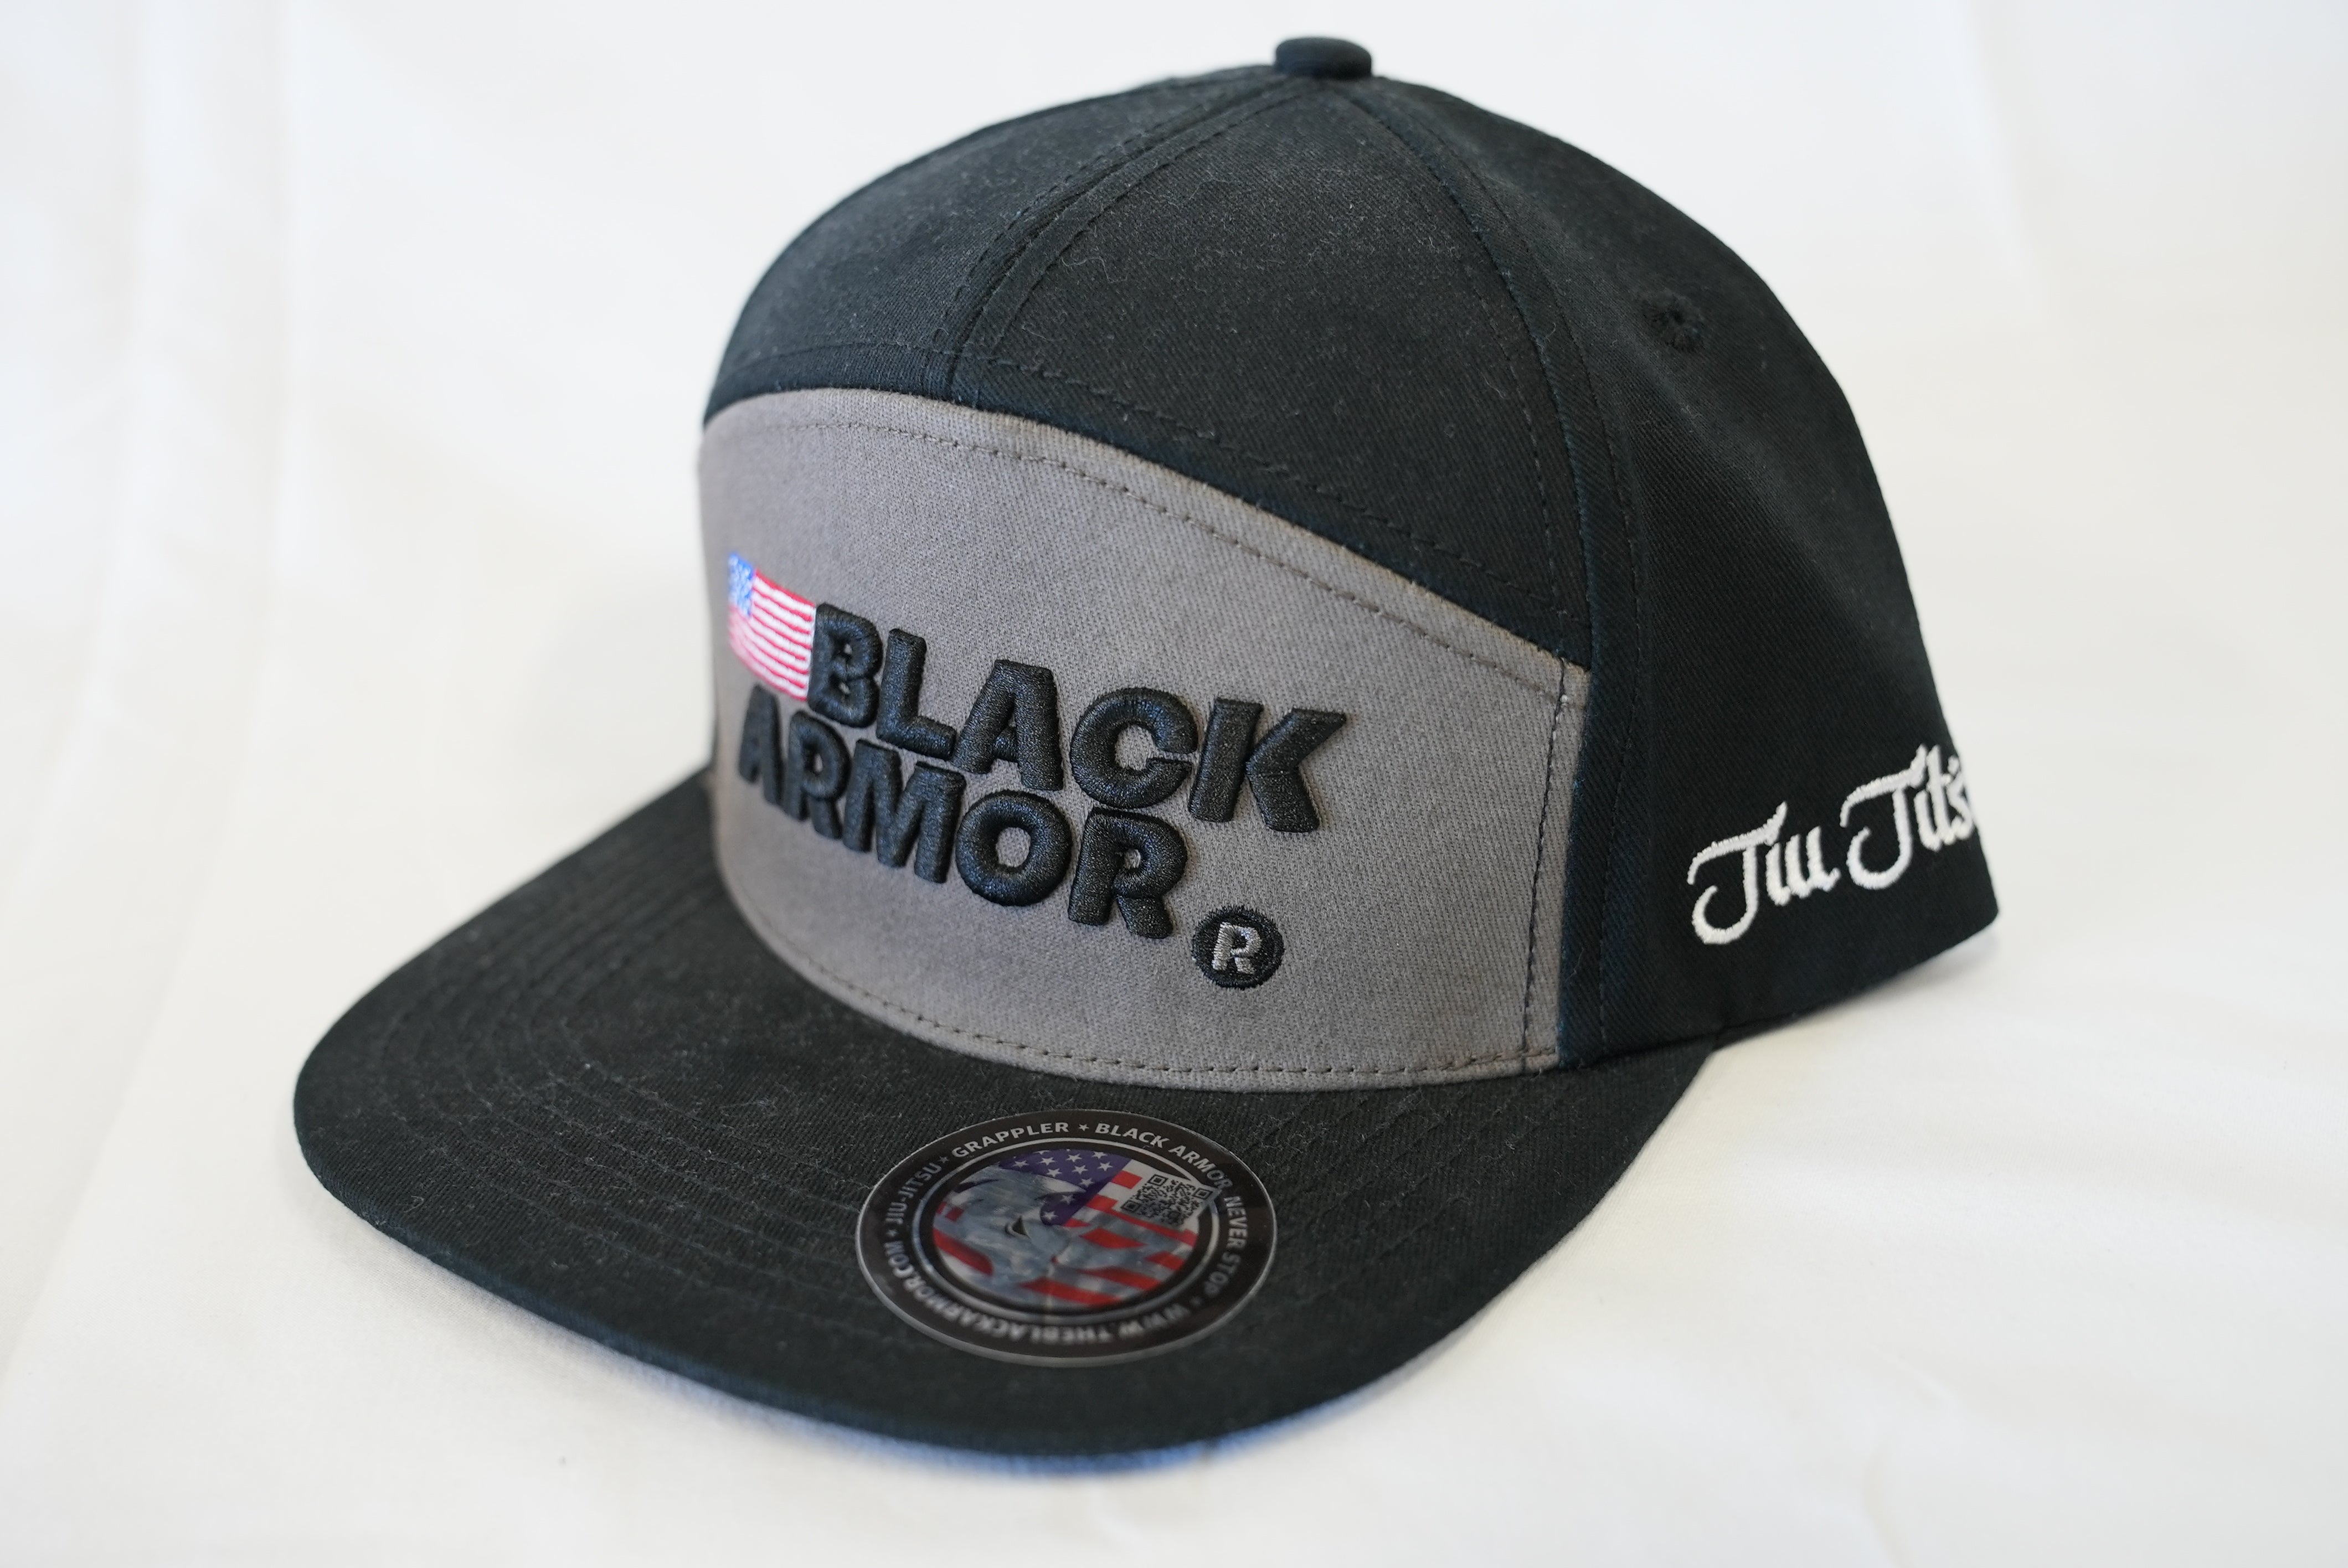 Gray and Black Embroidery Logo - B.A